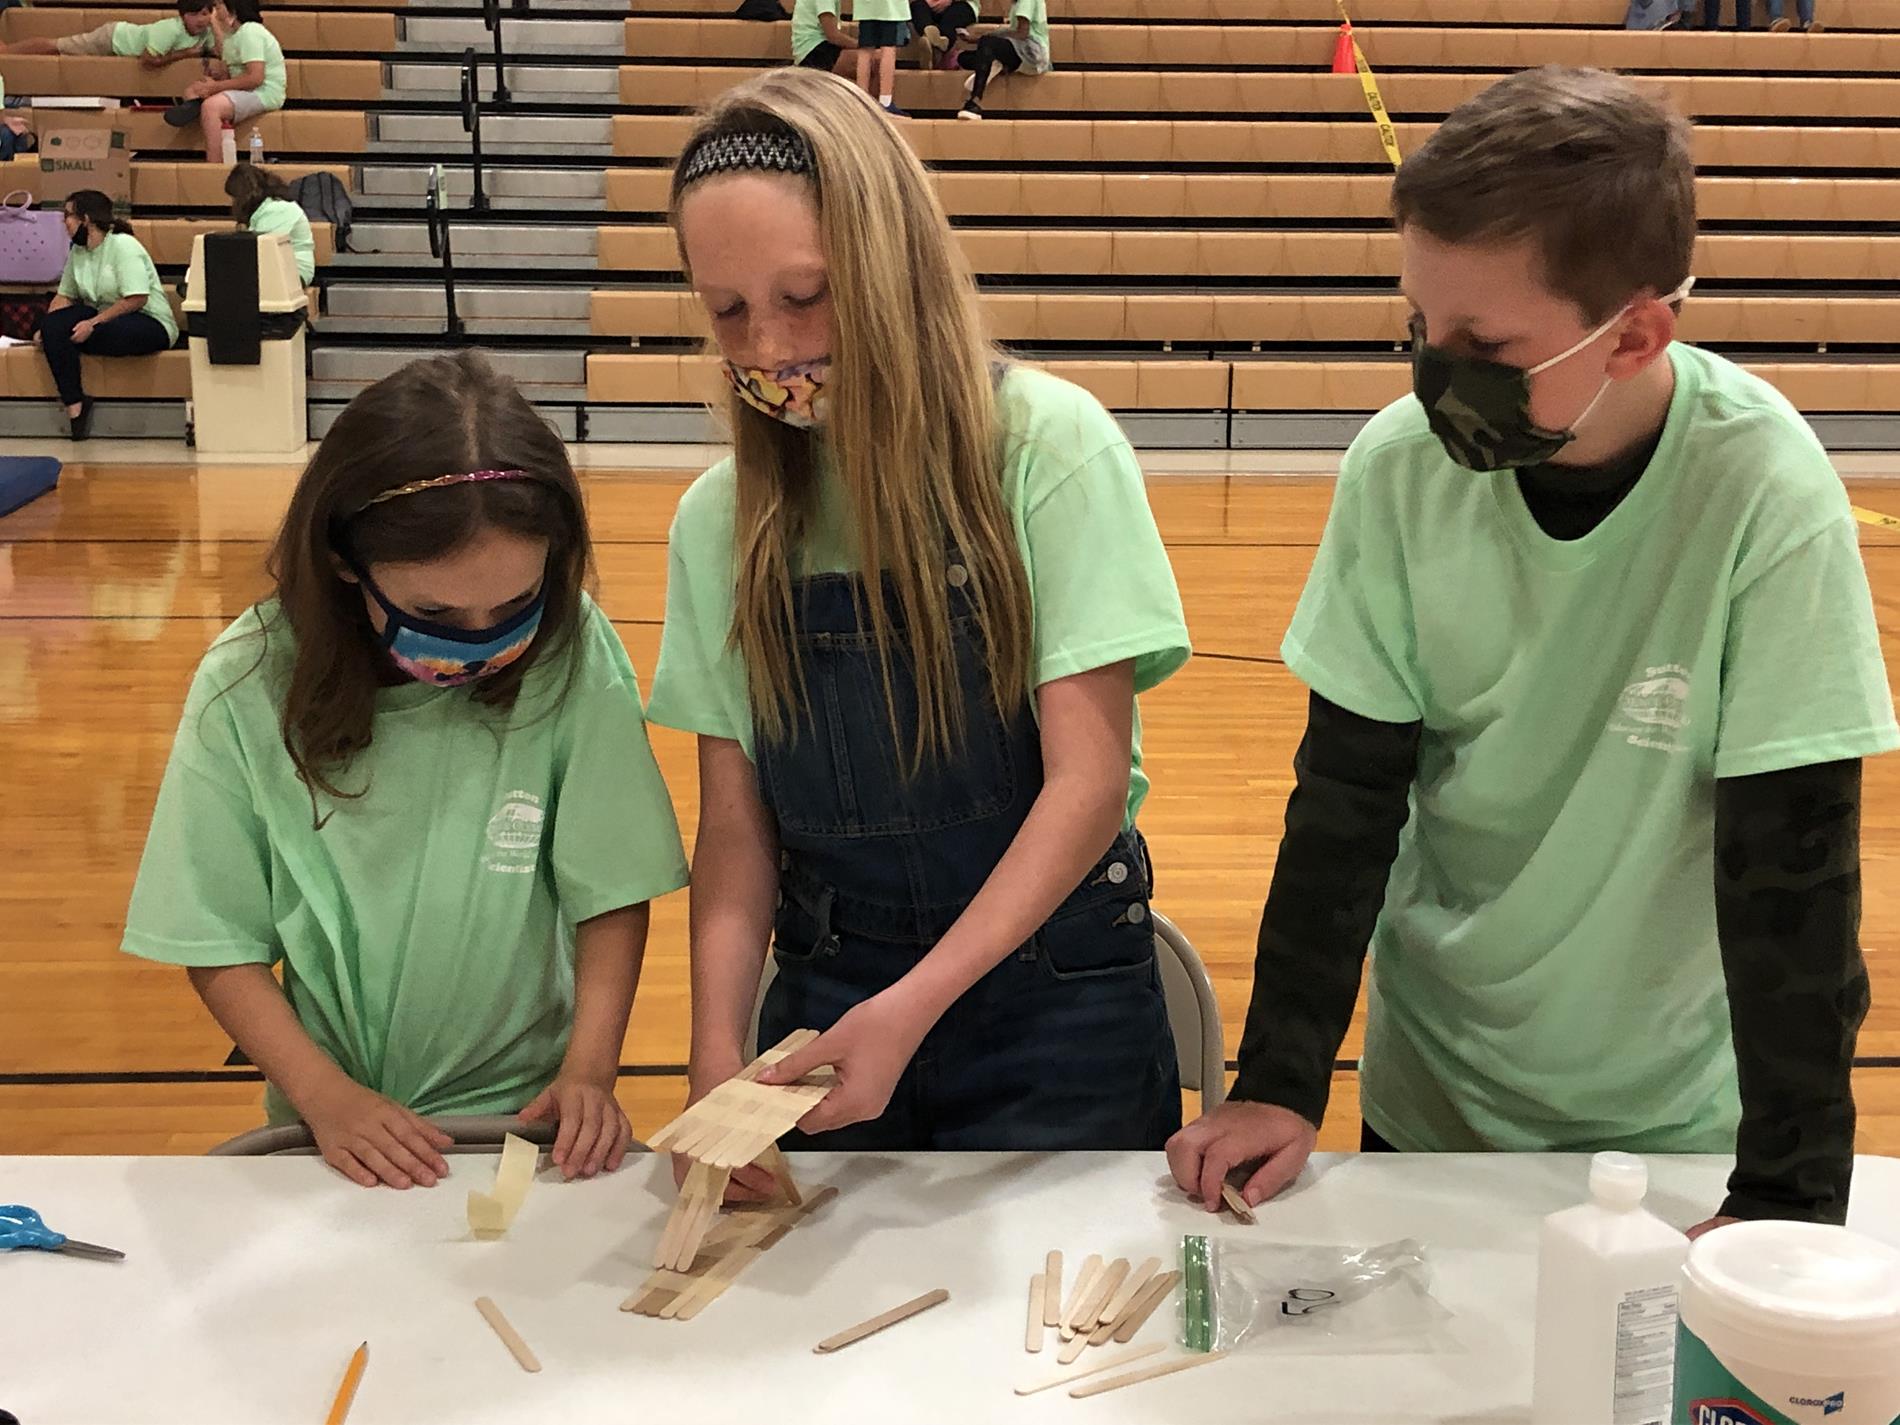 three students wearing green shirts building things out of paper